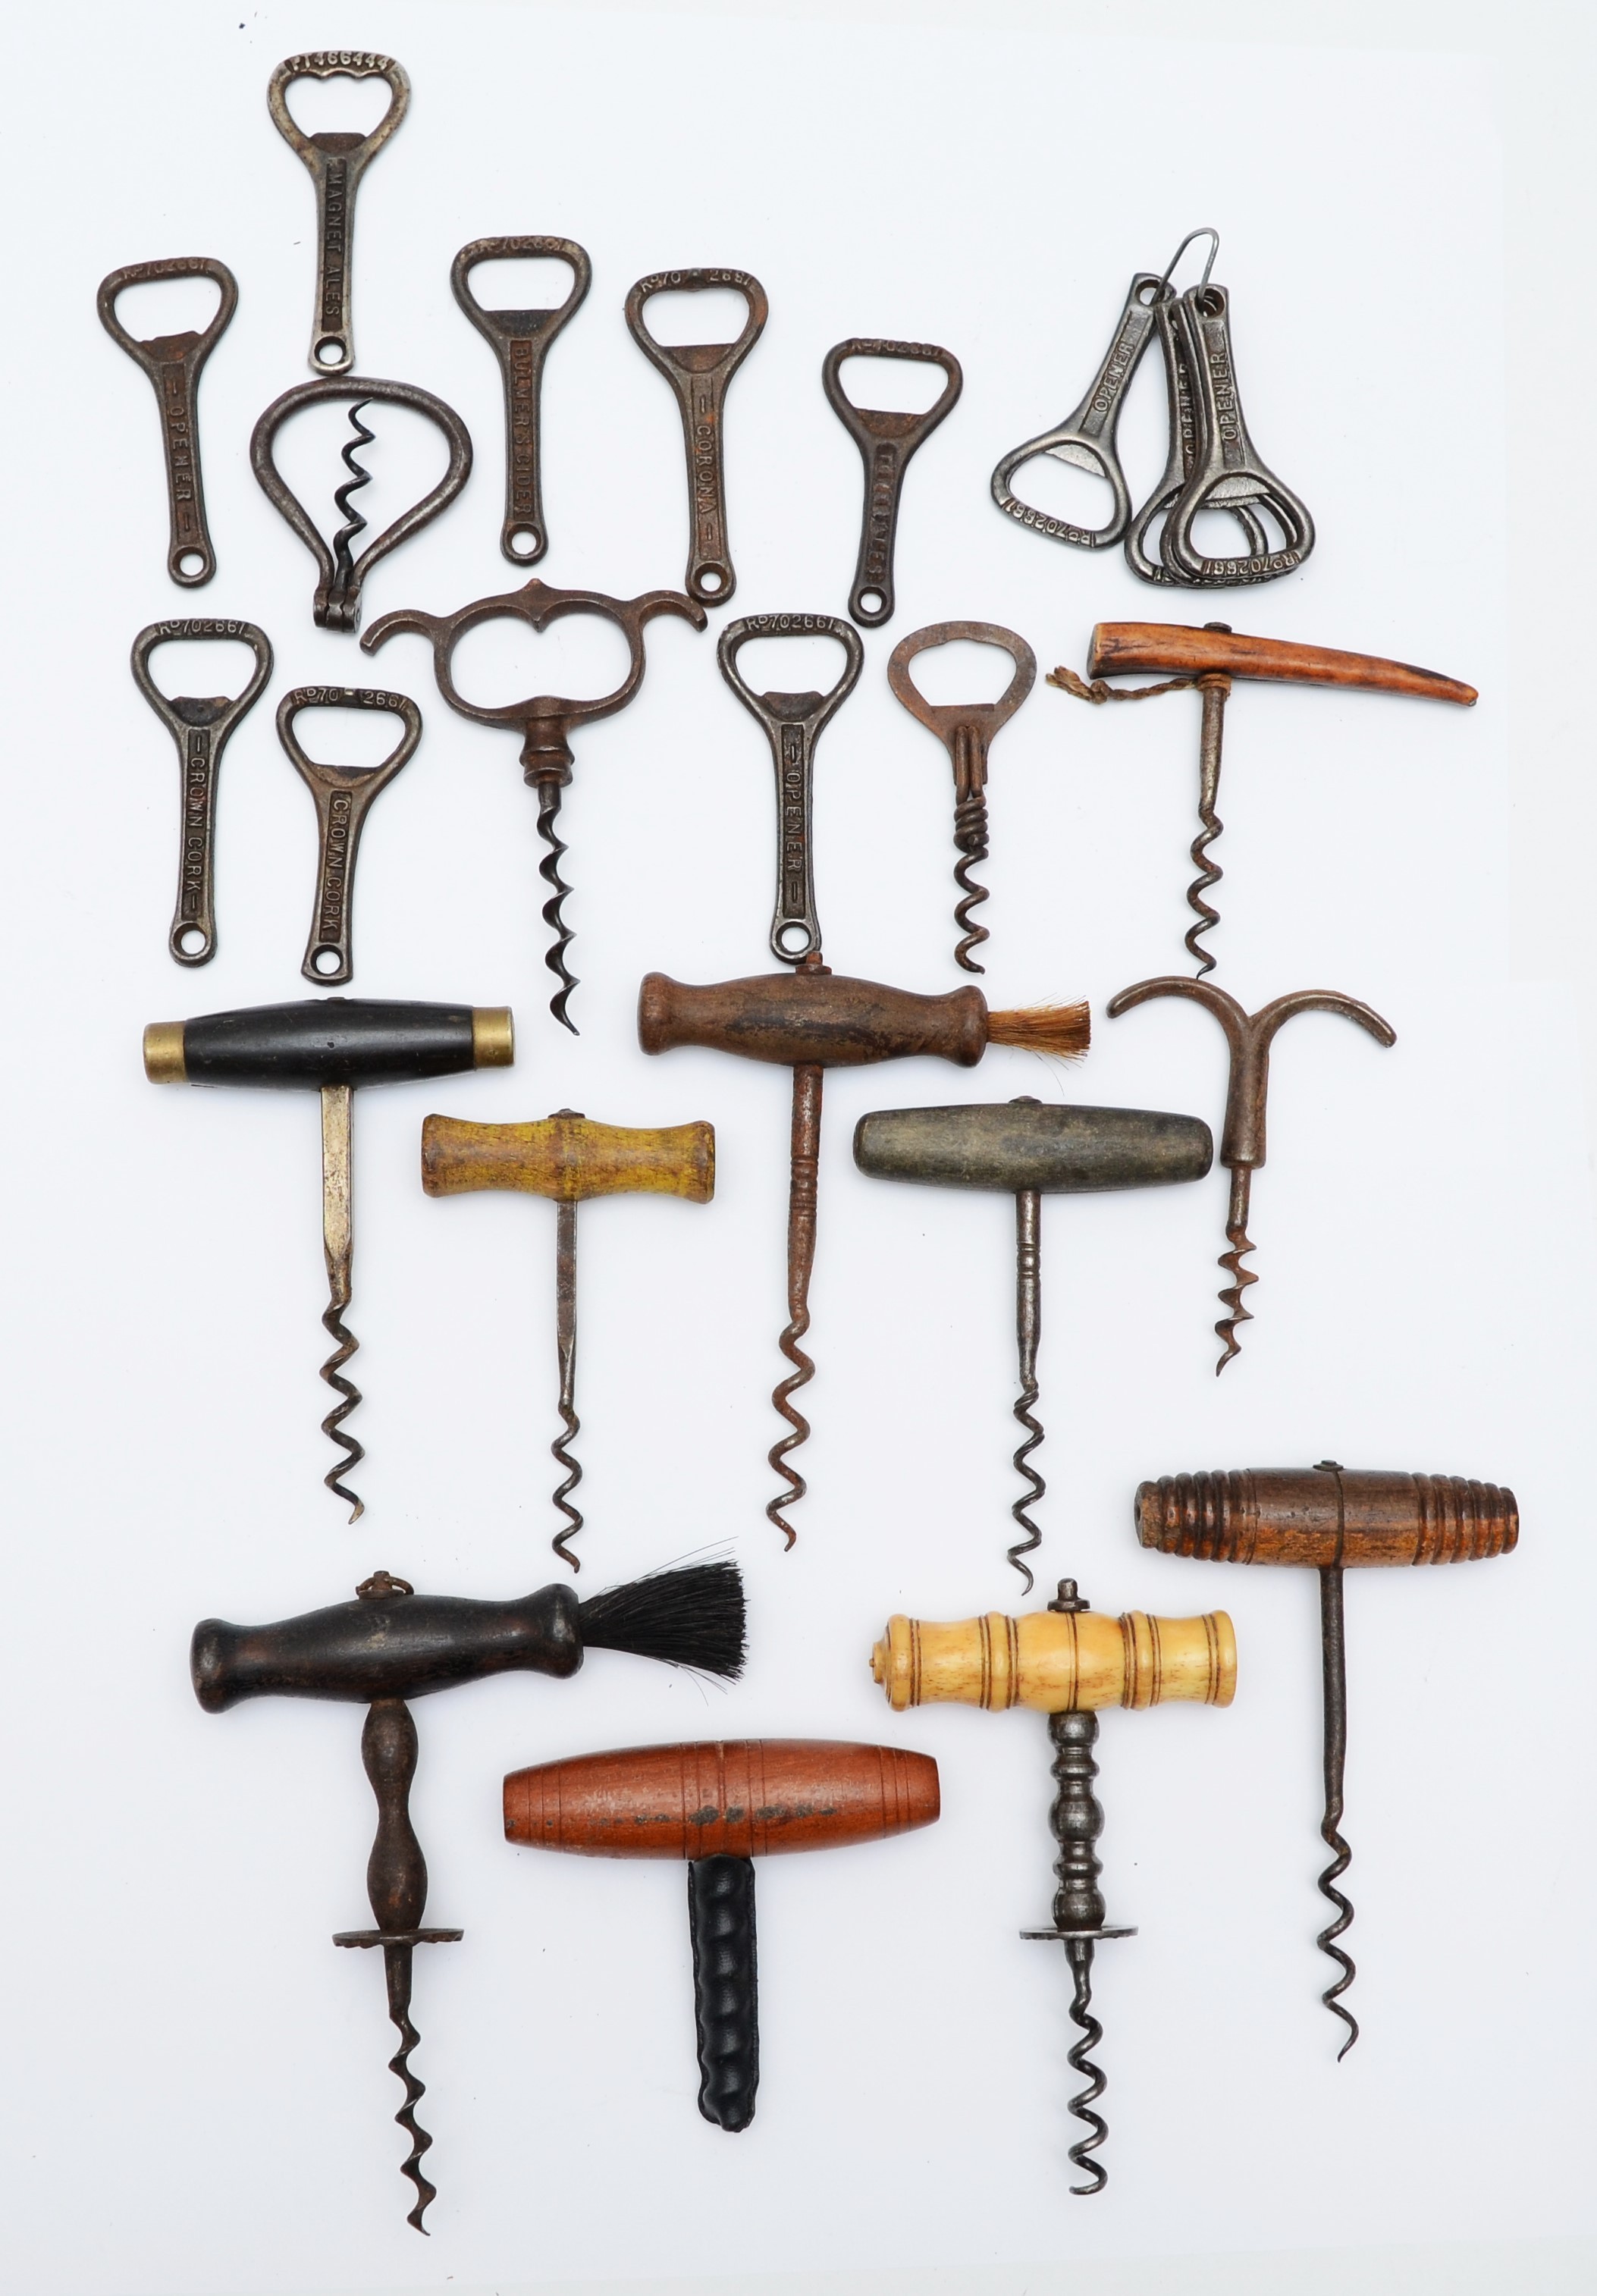 A collection of early 20th century and later corkscrews/bottle openers, including T-handle